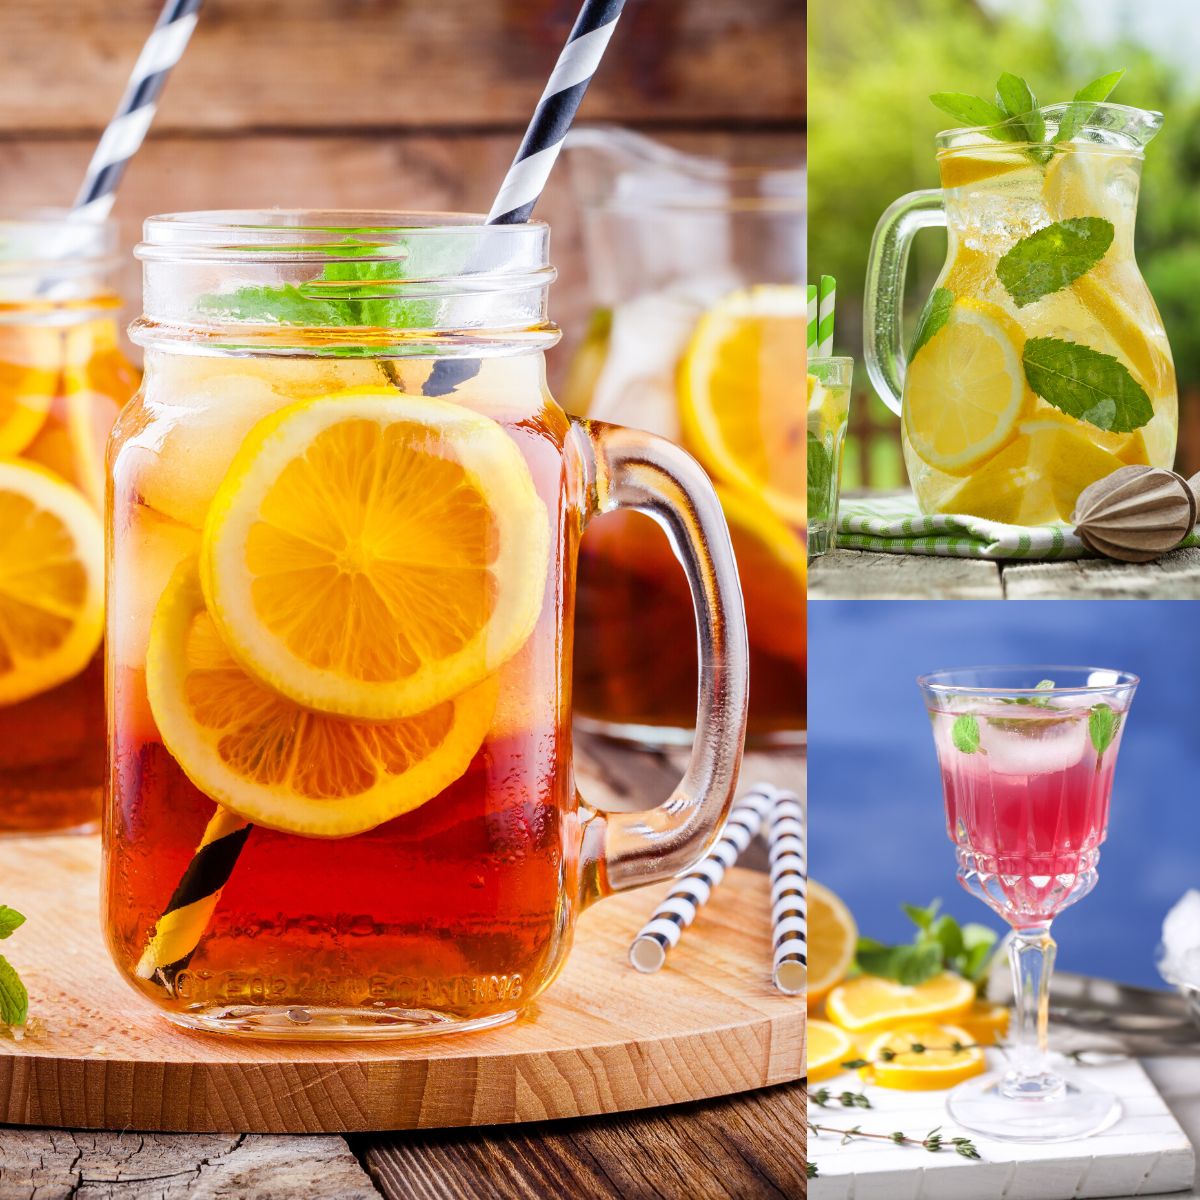 The photo collage shows several options for festive picnic beverages.